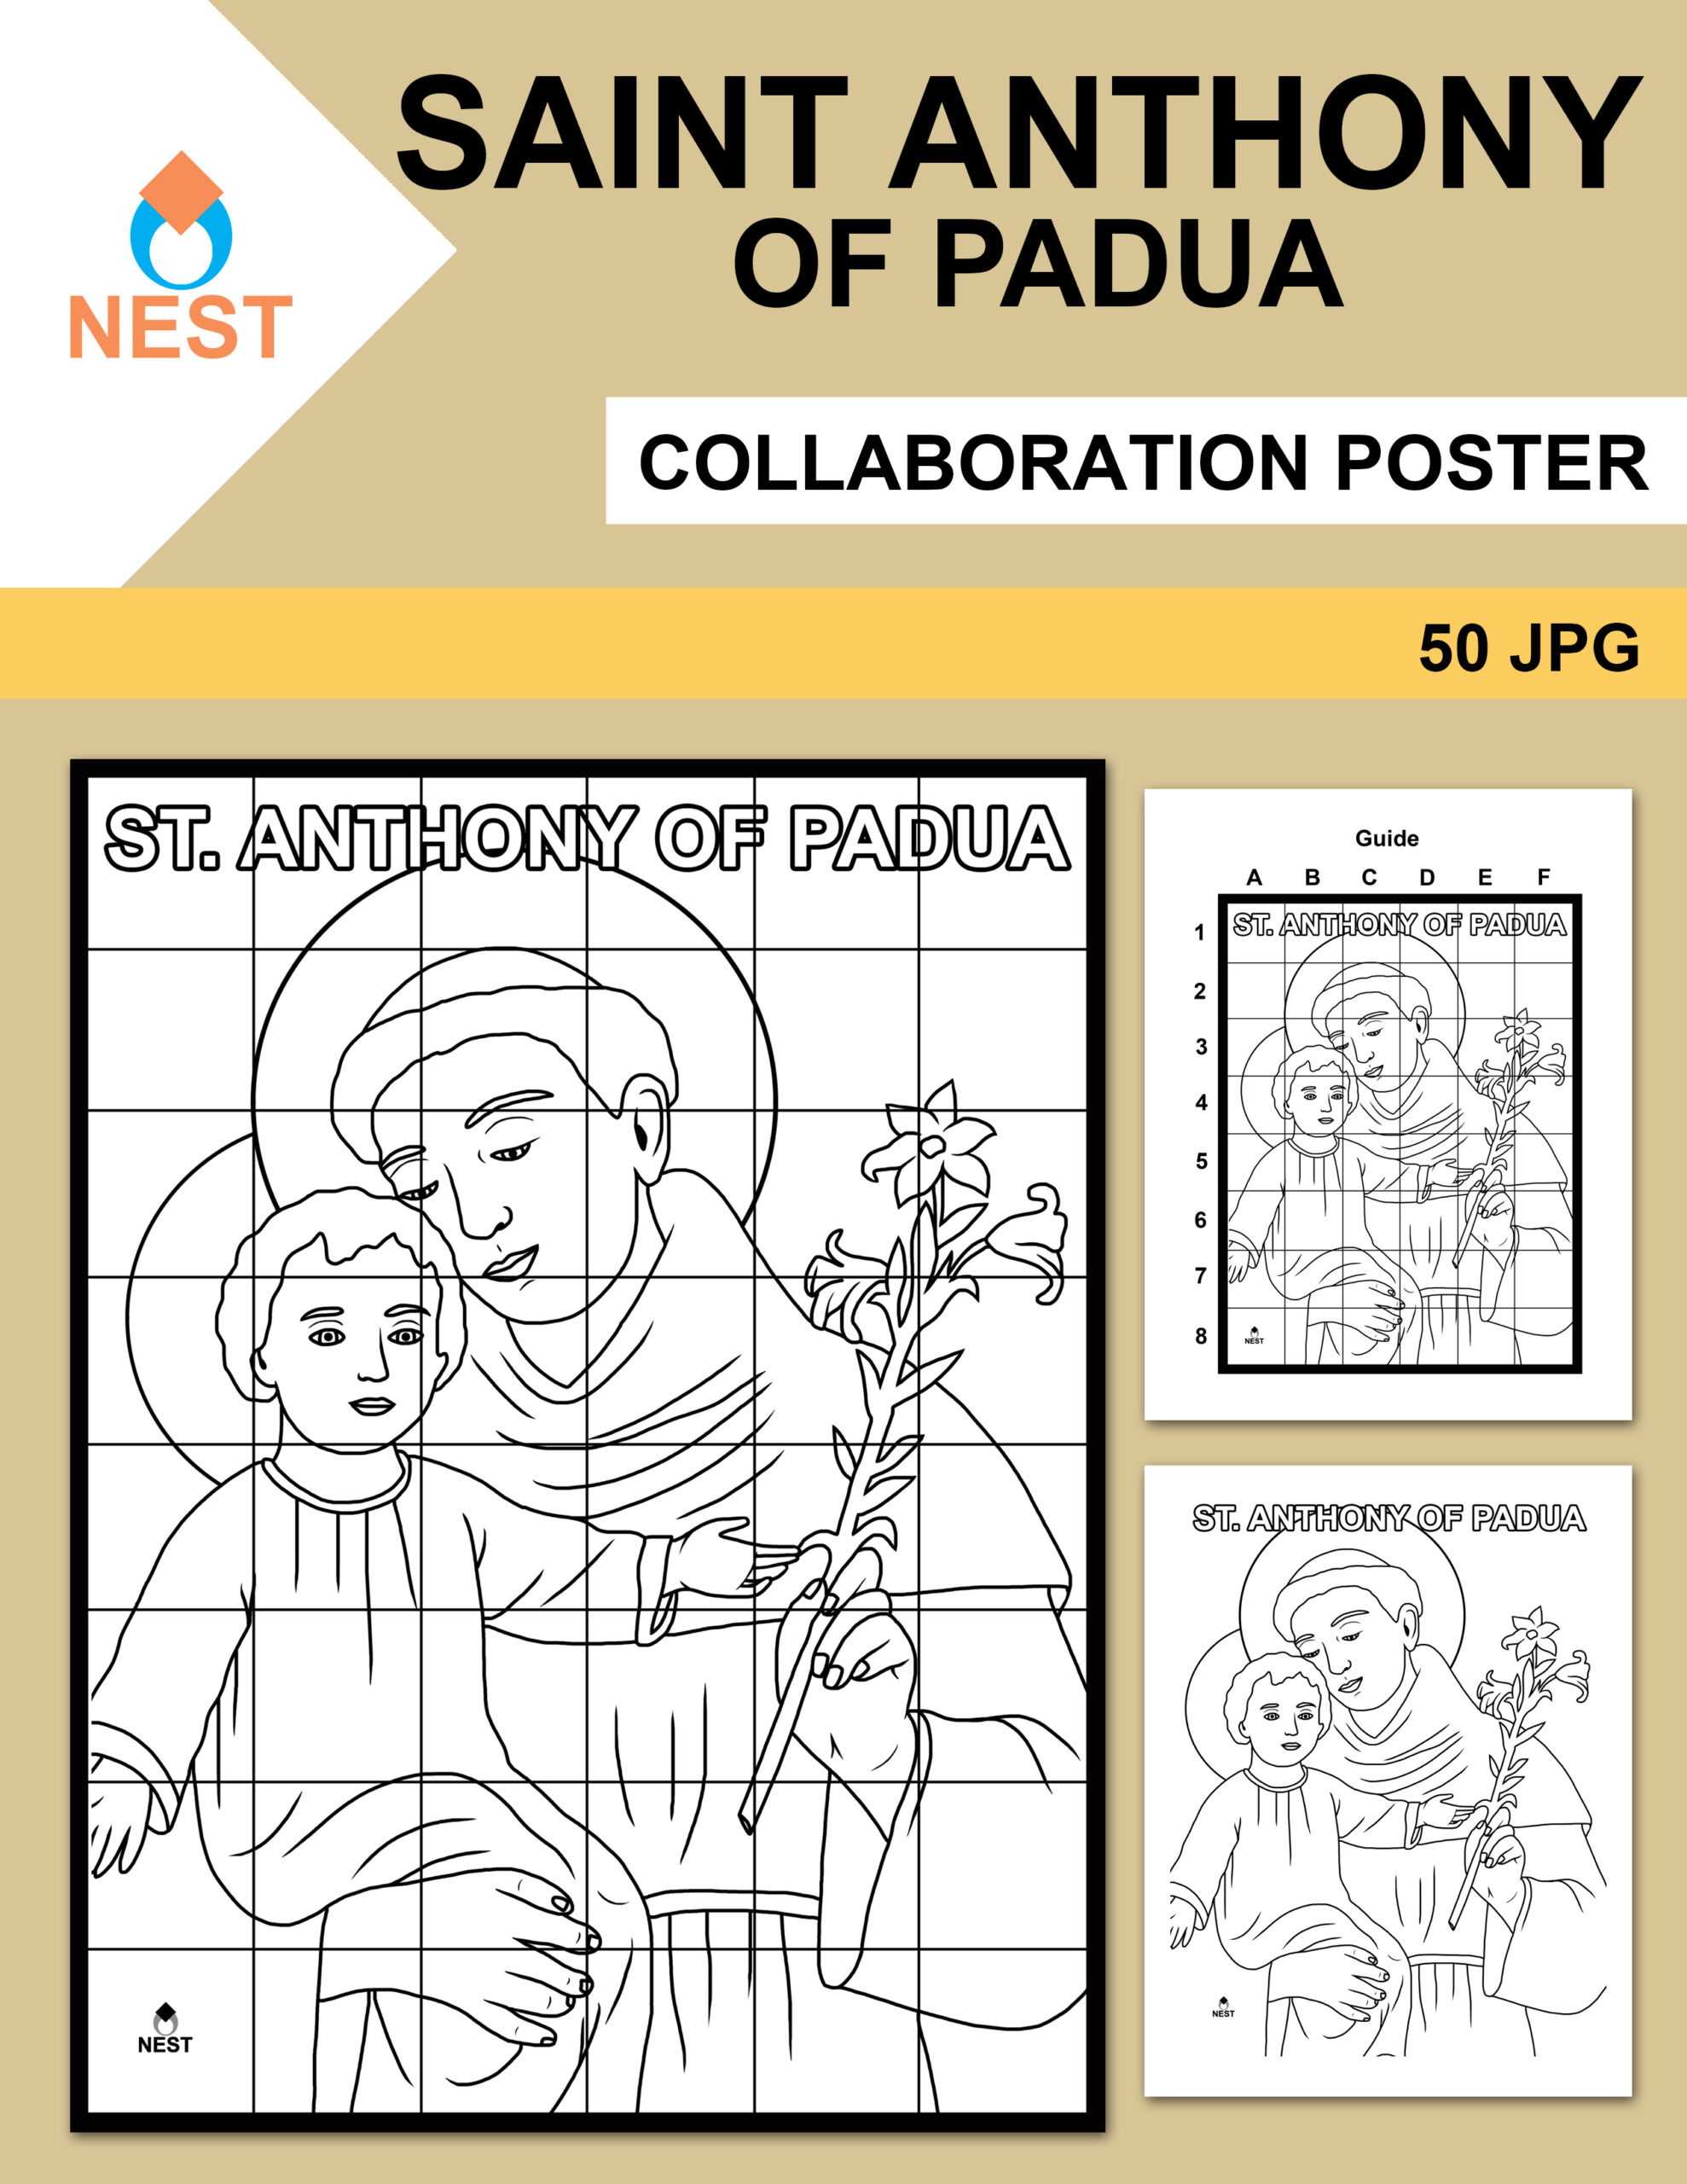 Saint anthony of padua collaboration poster made by teachers